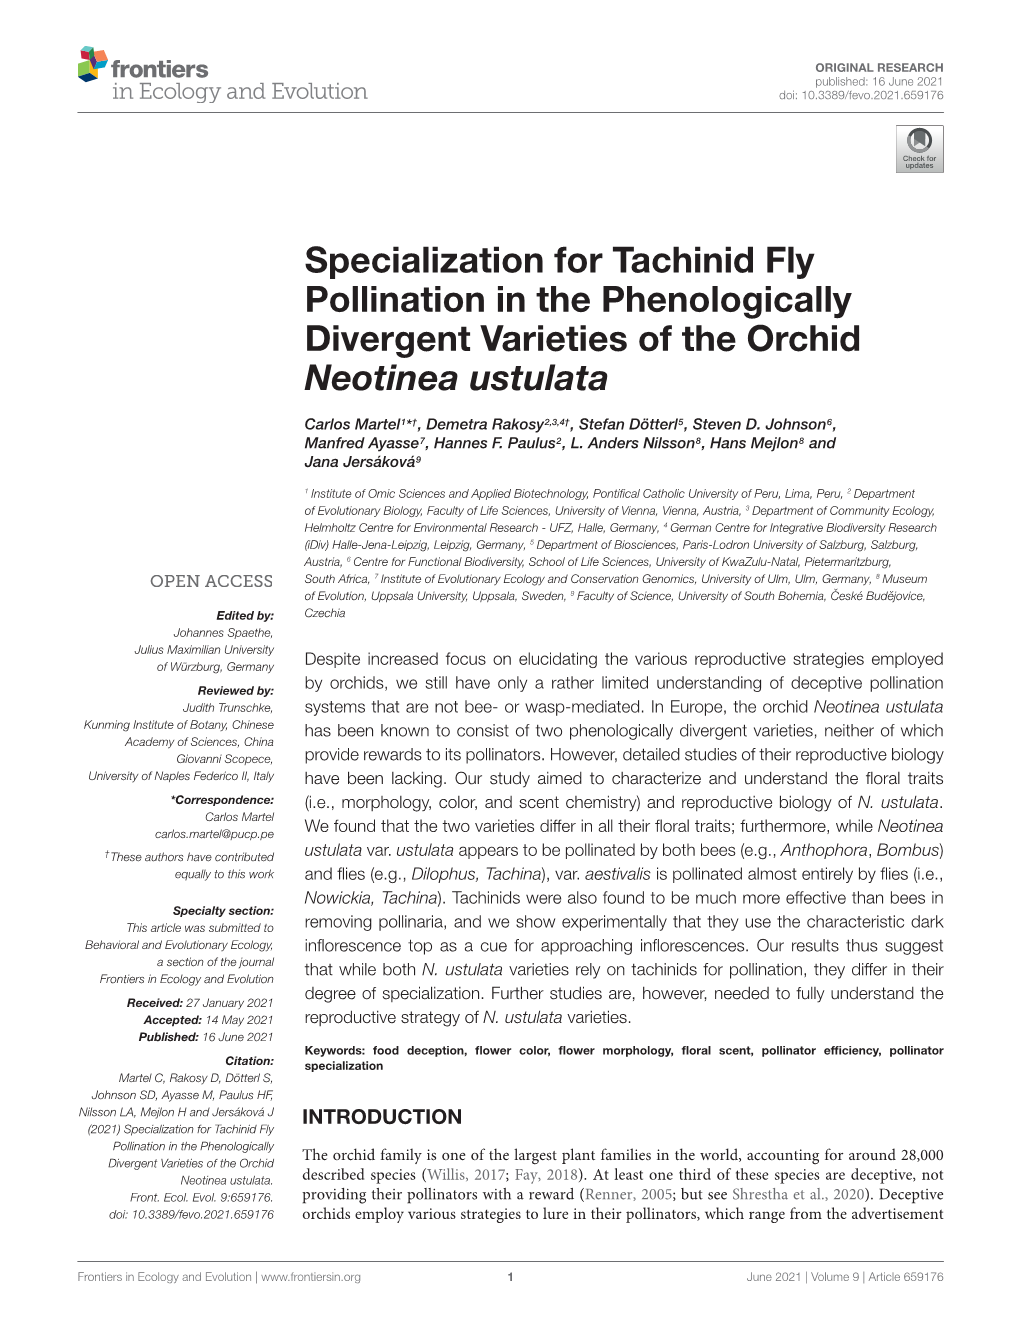 Specialization for Tachinid Fly Pollination in the Phenologically Divergent Varieties of the Orchid Neotinea Ustulata